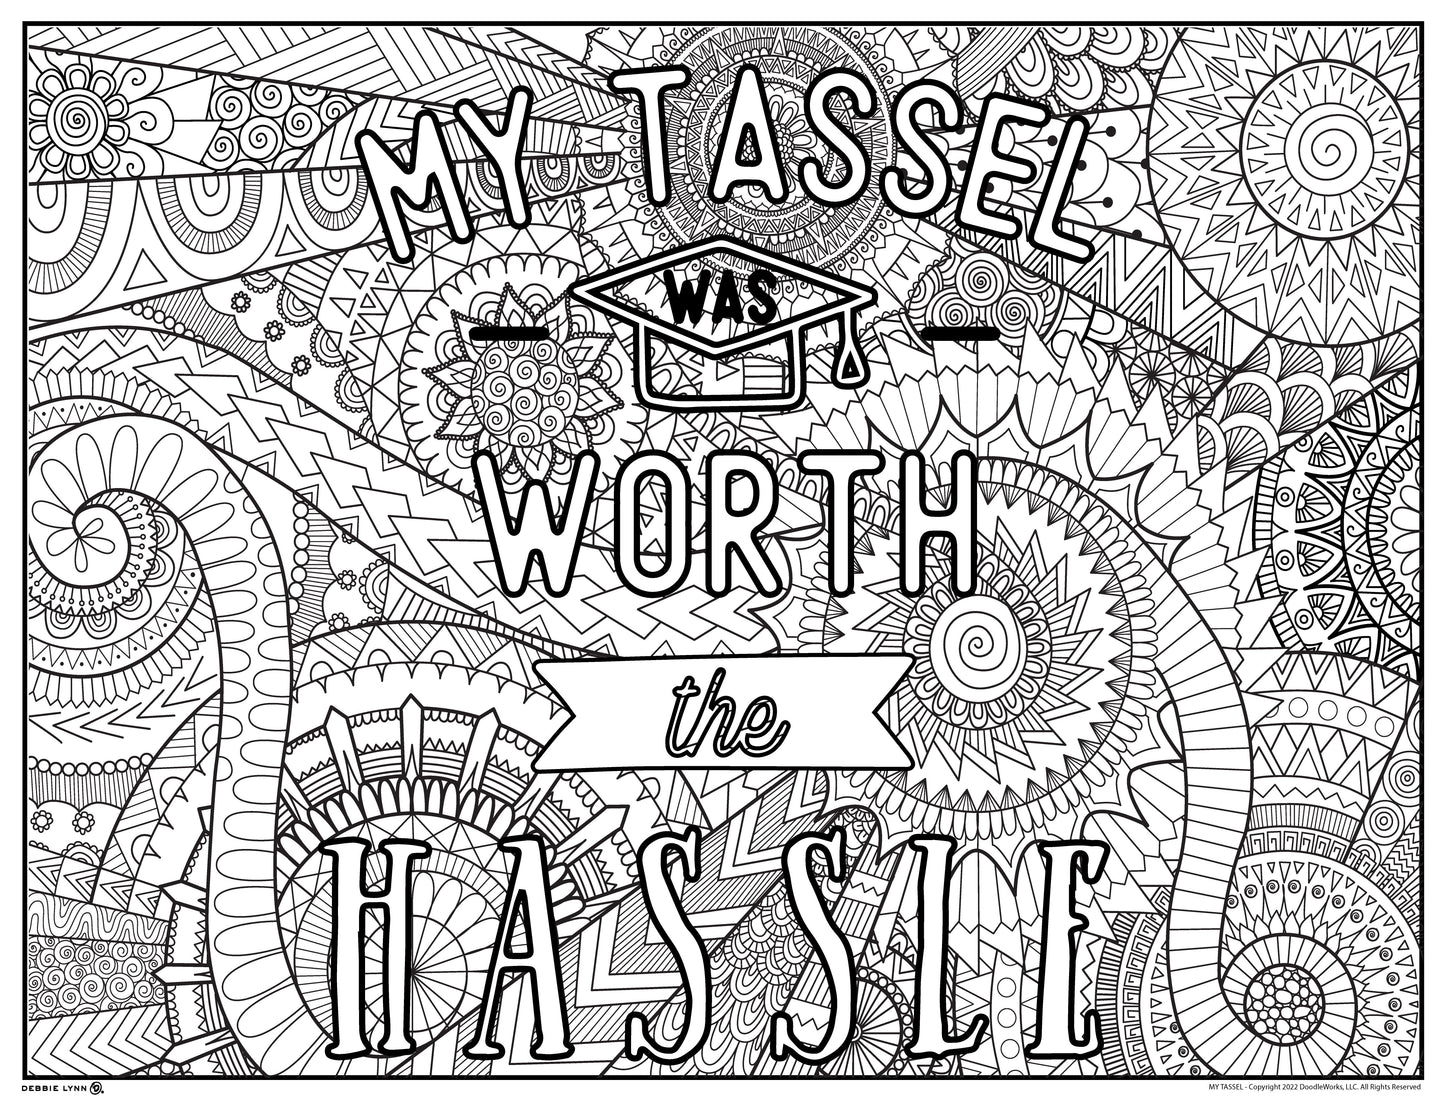 My Tassel Was Worth the Hassle Personalized Giant Coloring Poster 46"x60"